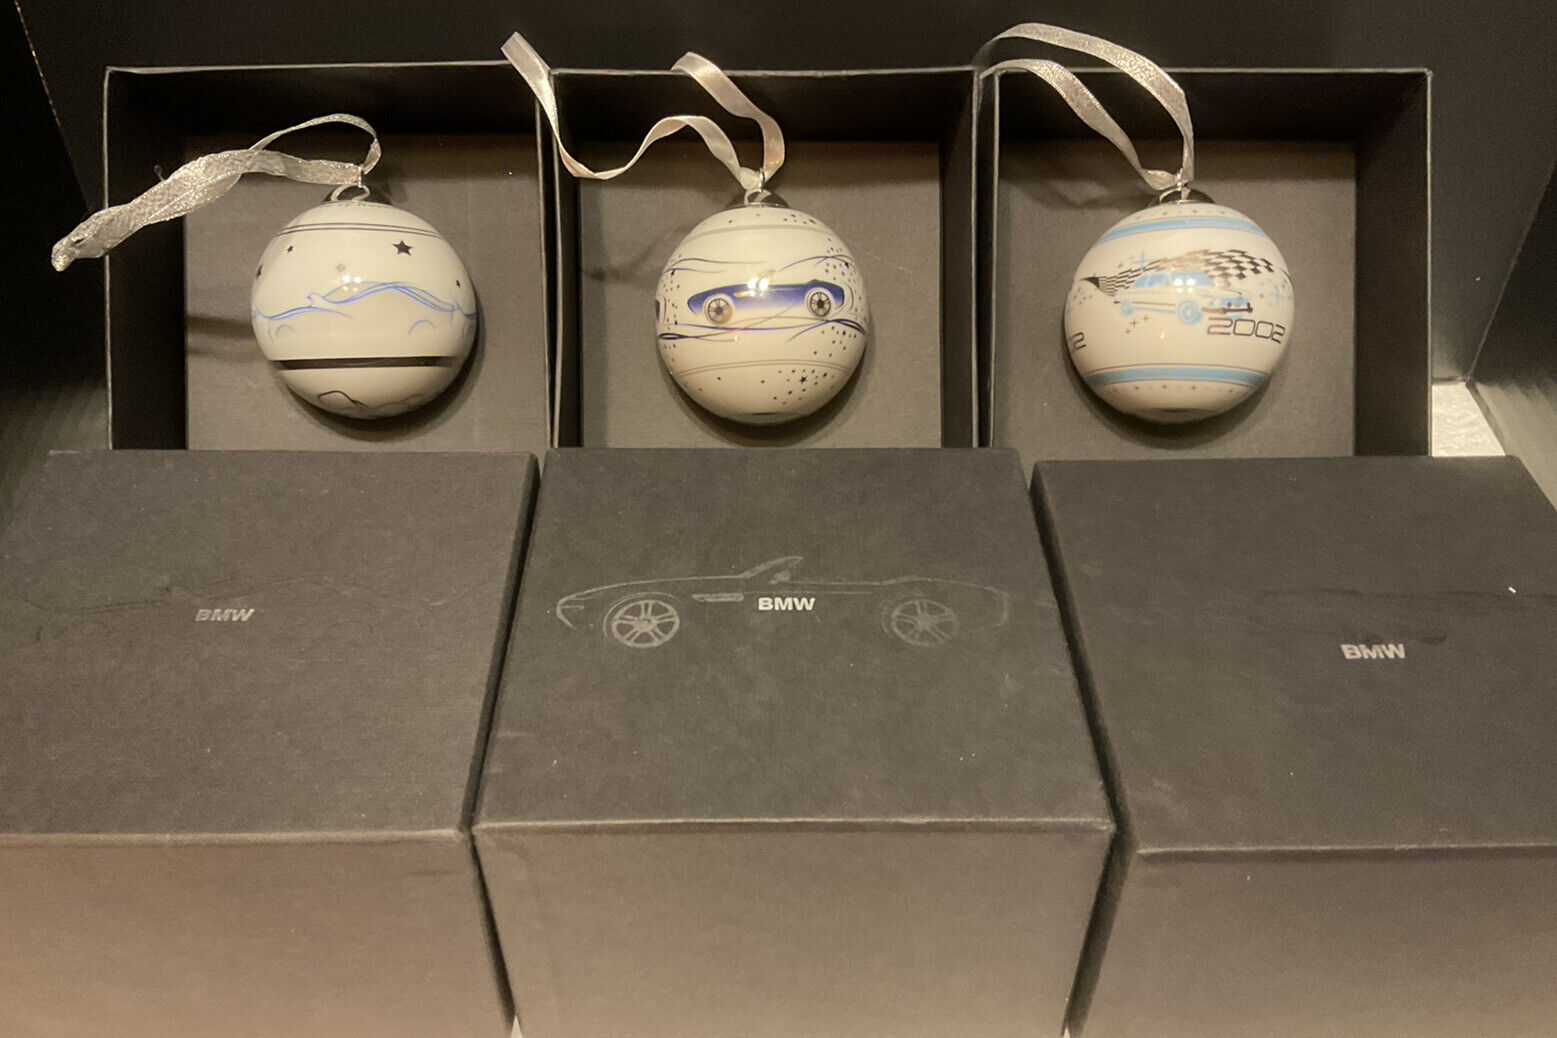 Rosenthal BMW Limited Edition Christmas Ornaments 3 pc Set - 2000/2001/2002